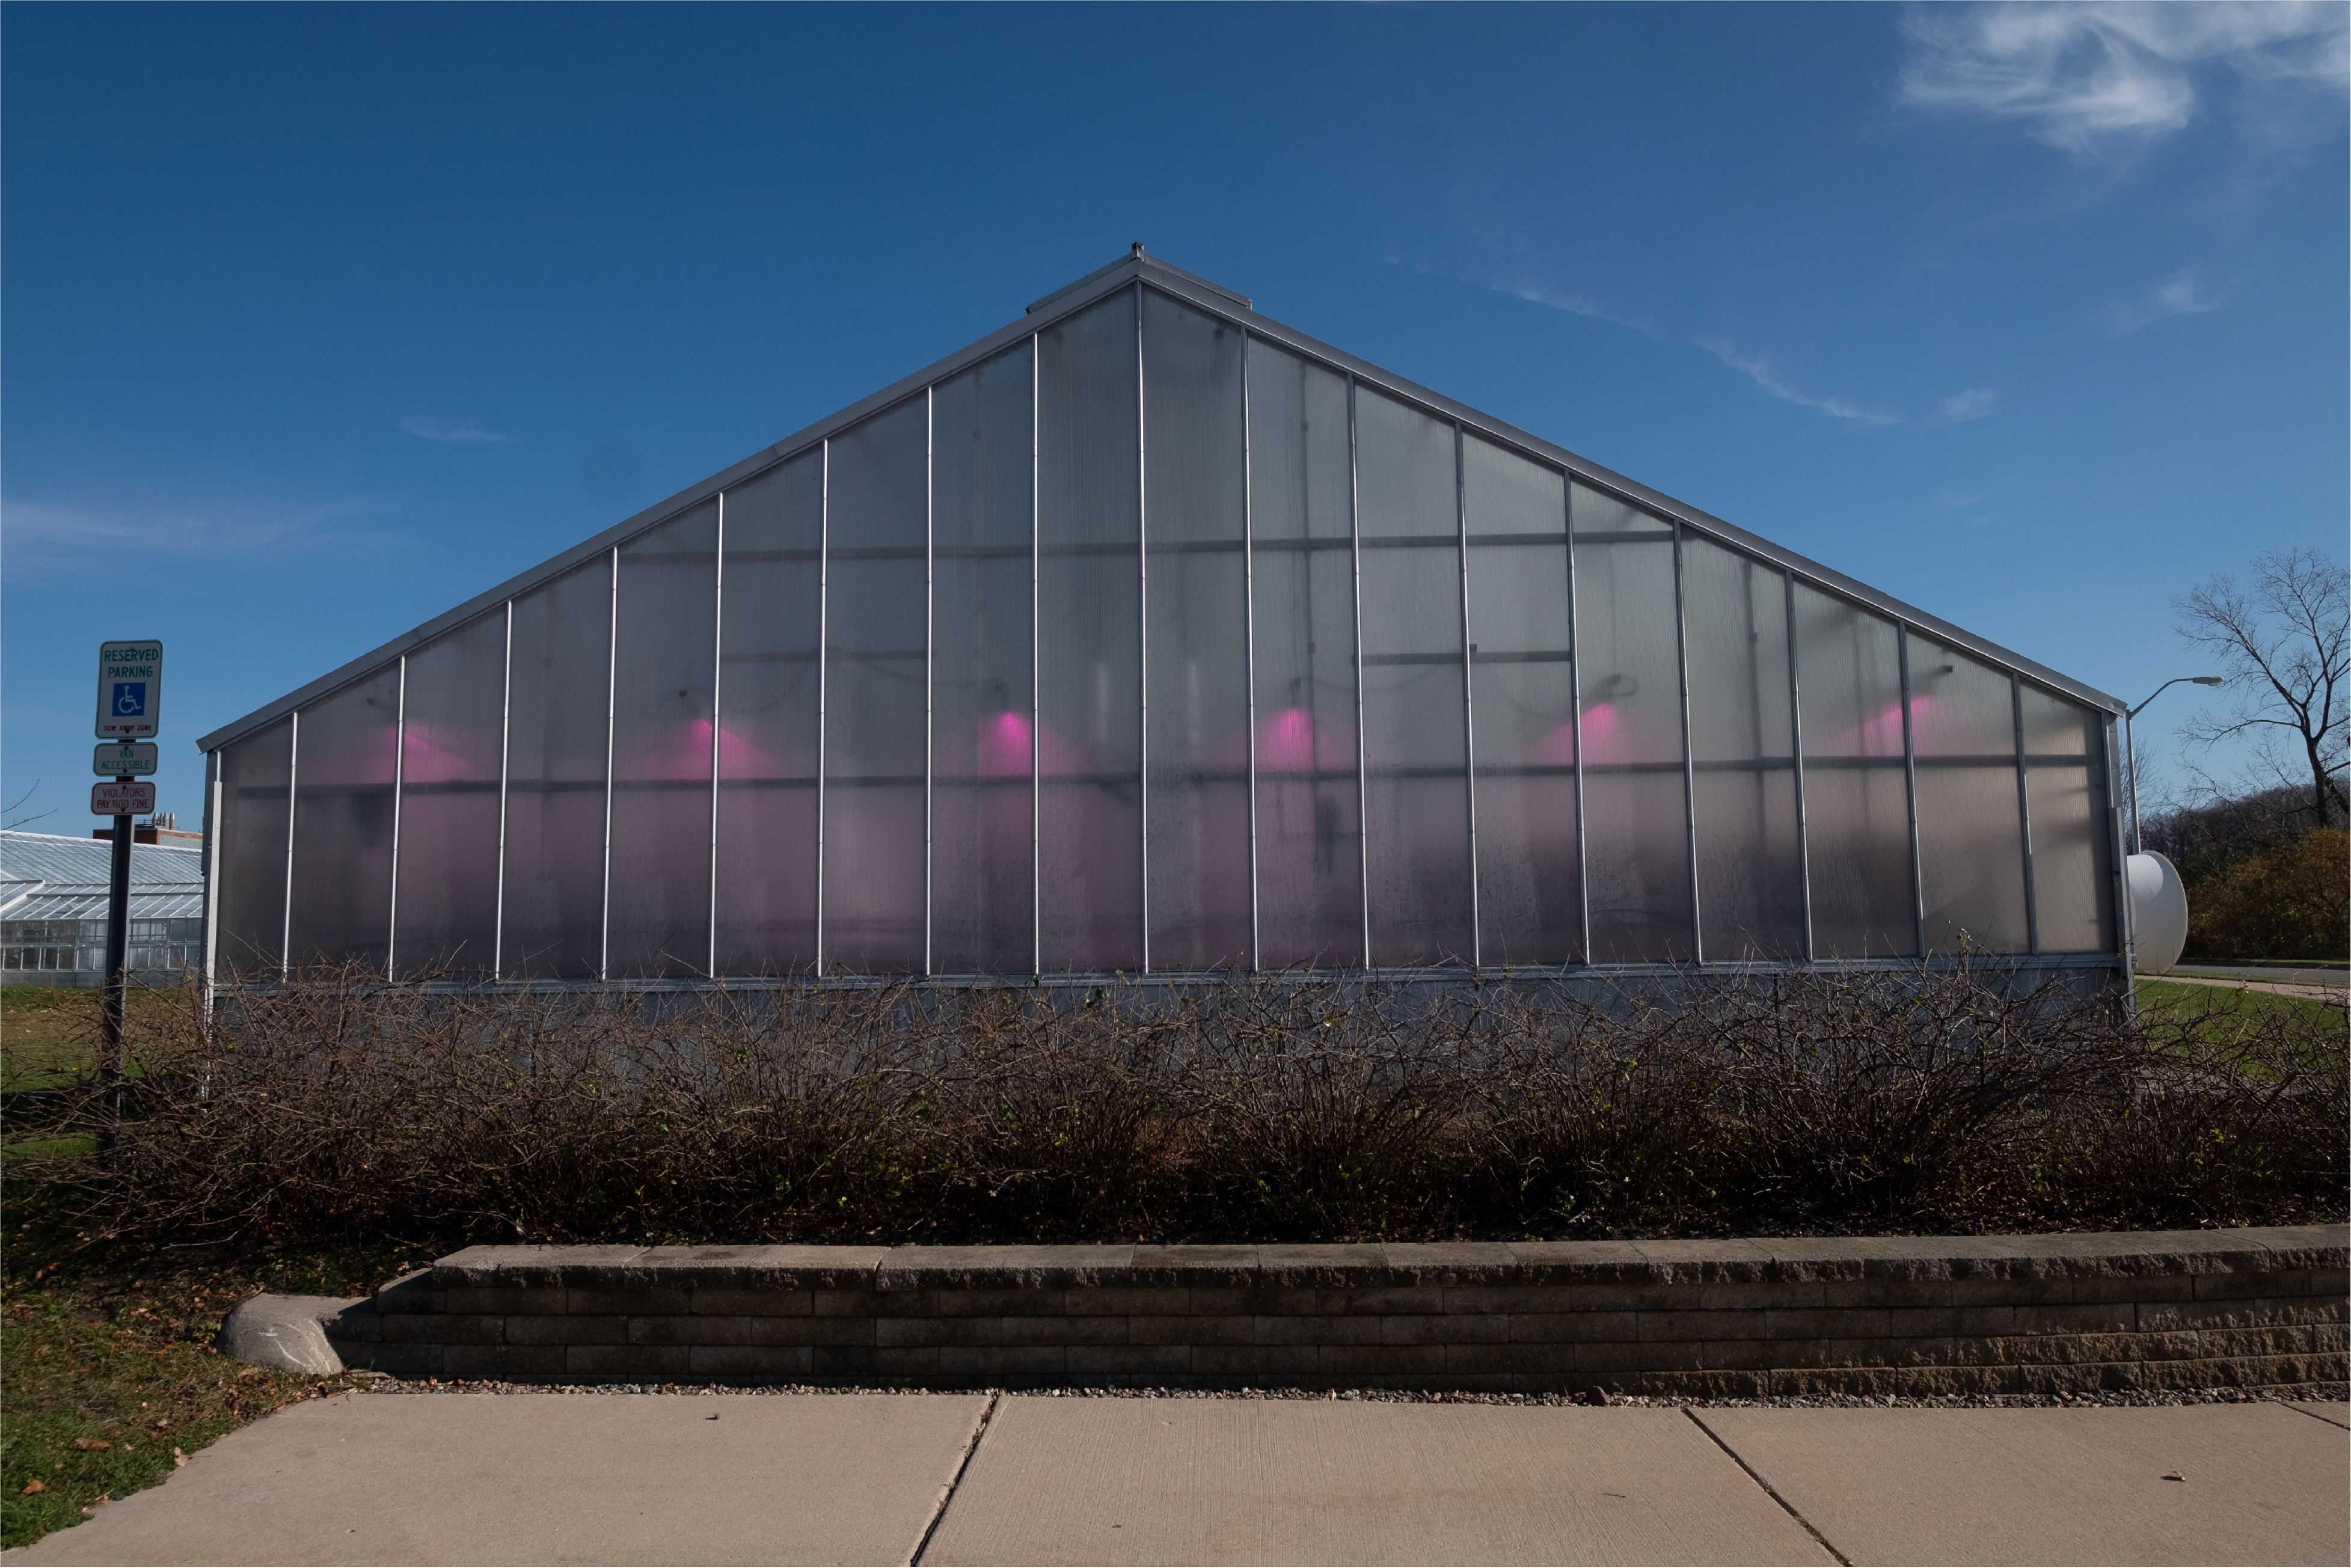 Exterior view of a greenhouse with pink LED lights inside